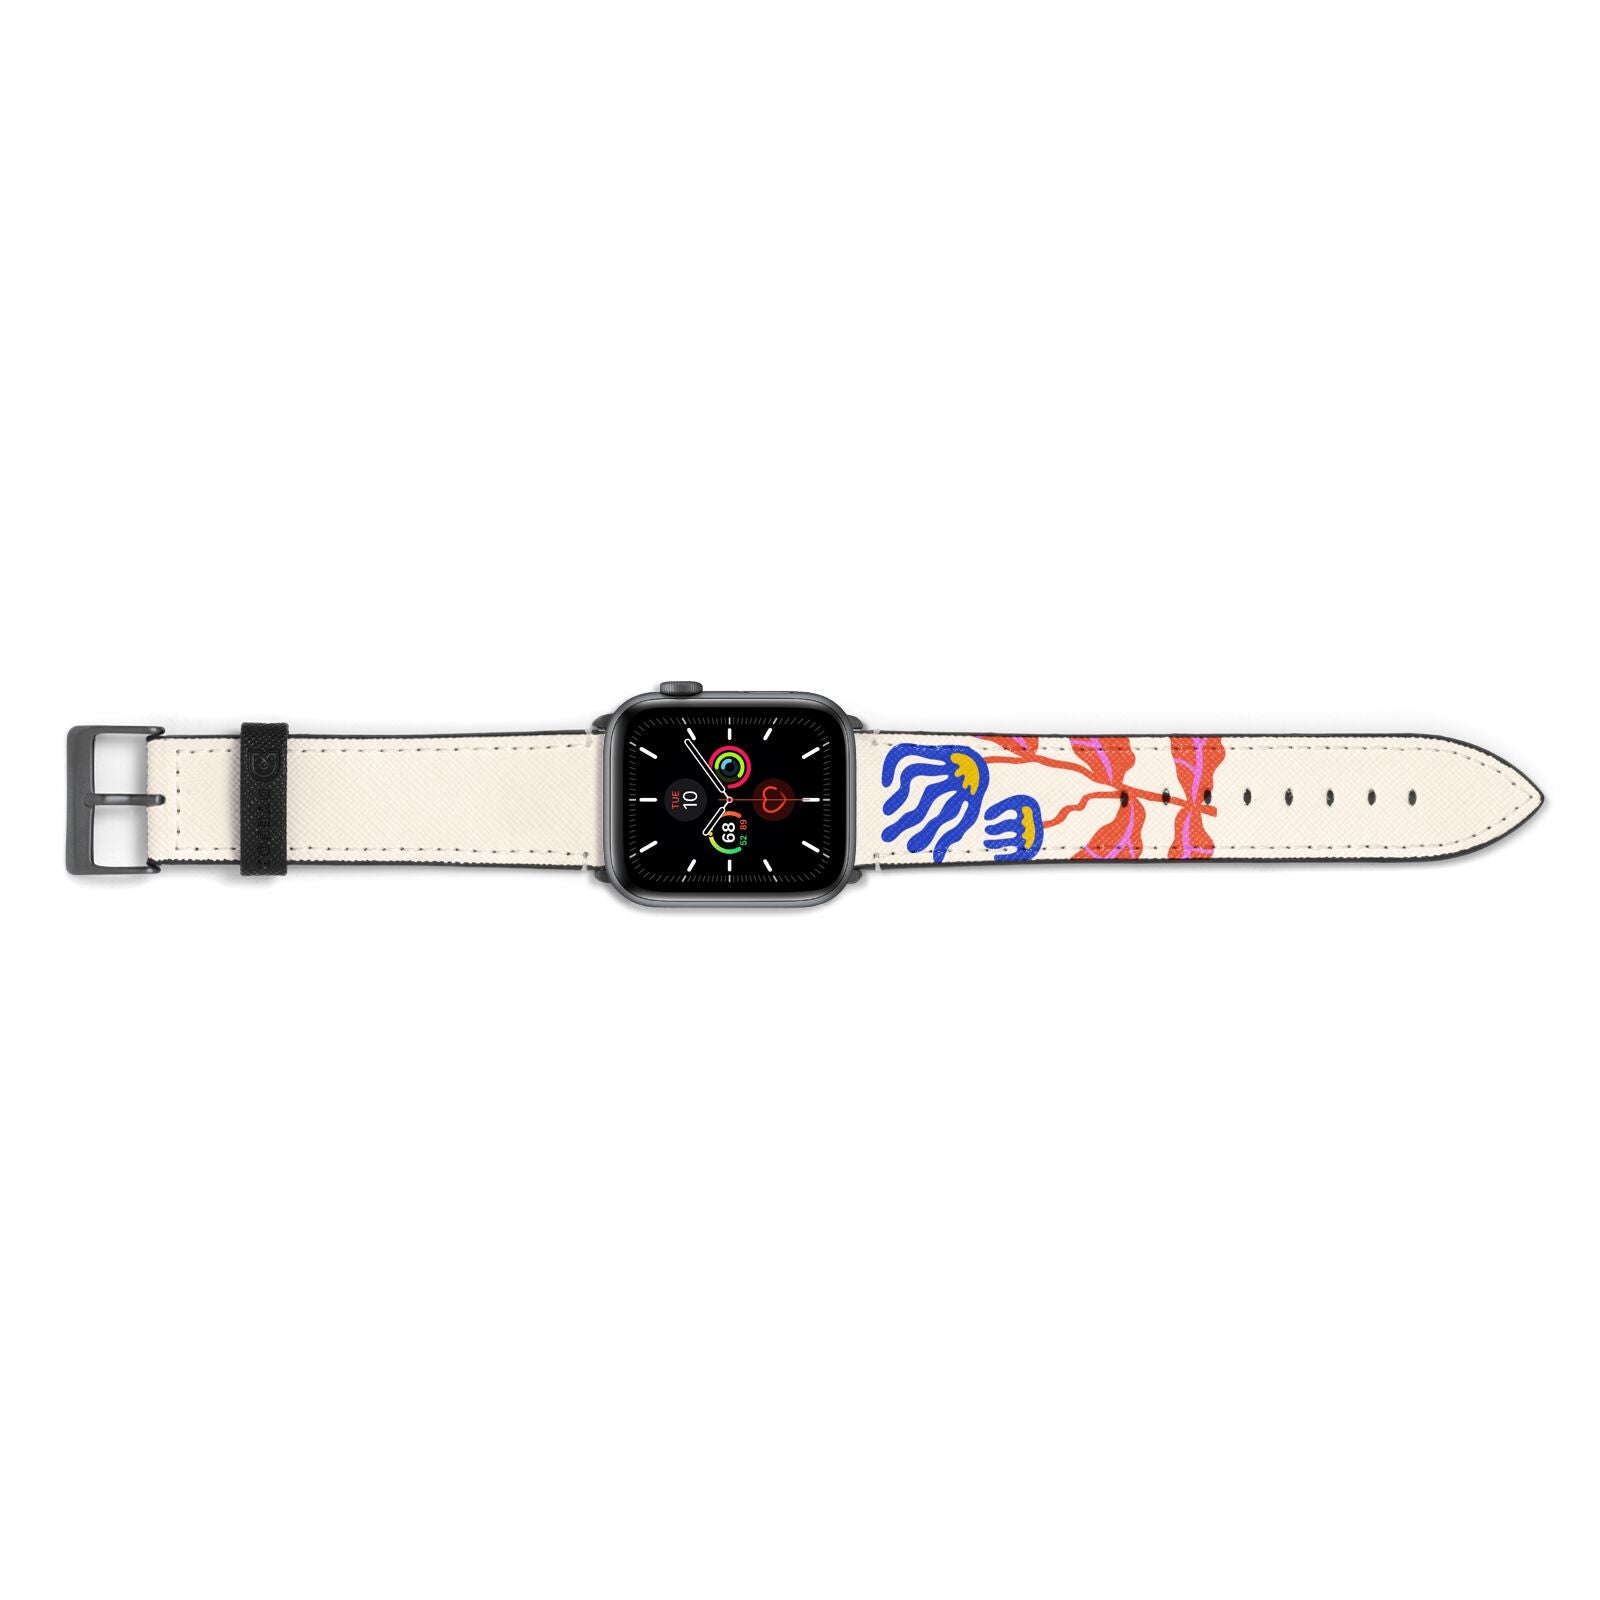 Contemporary Floral Apple Watch Strap Landscape Image Space Grey Hardware